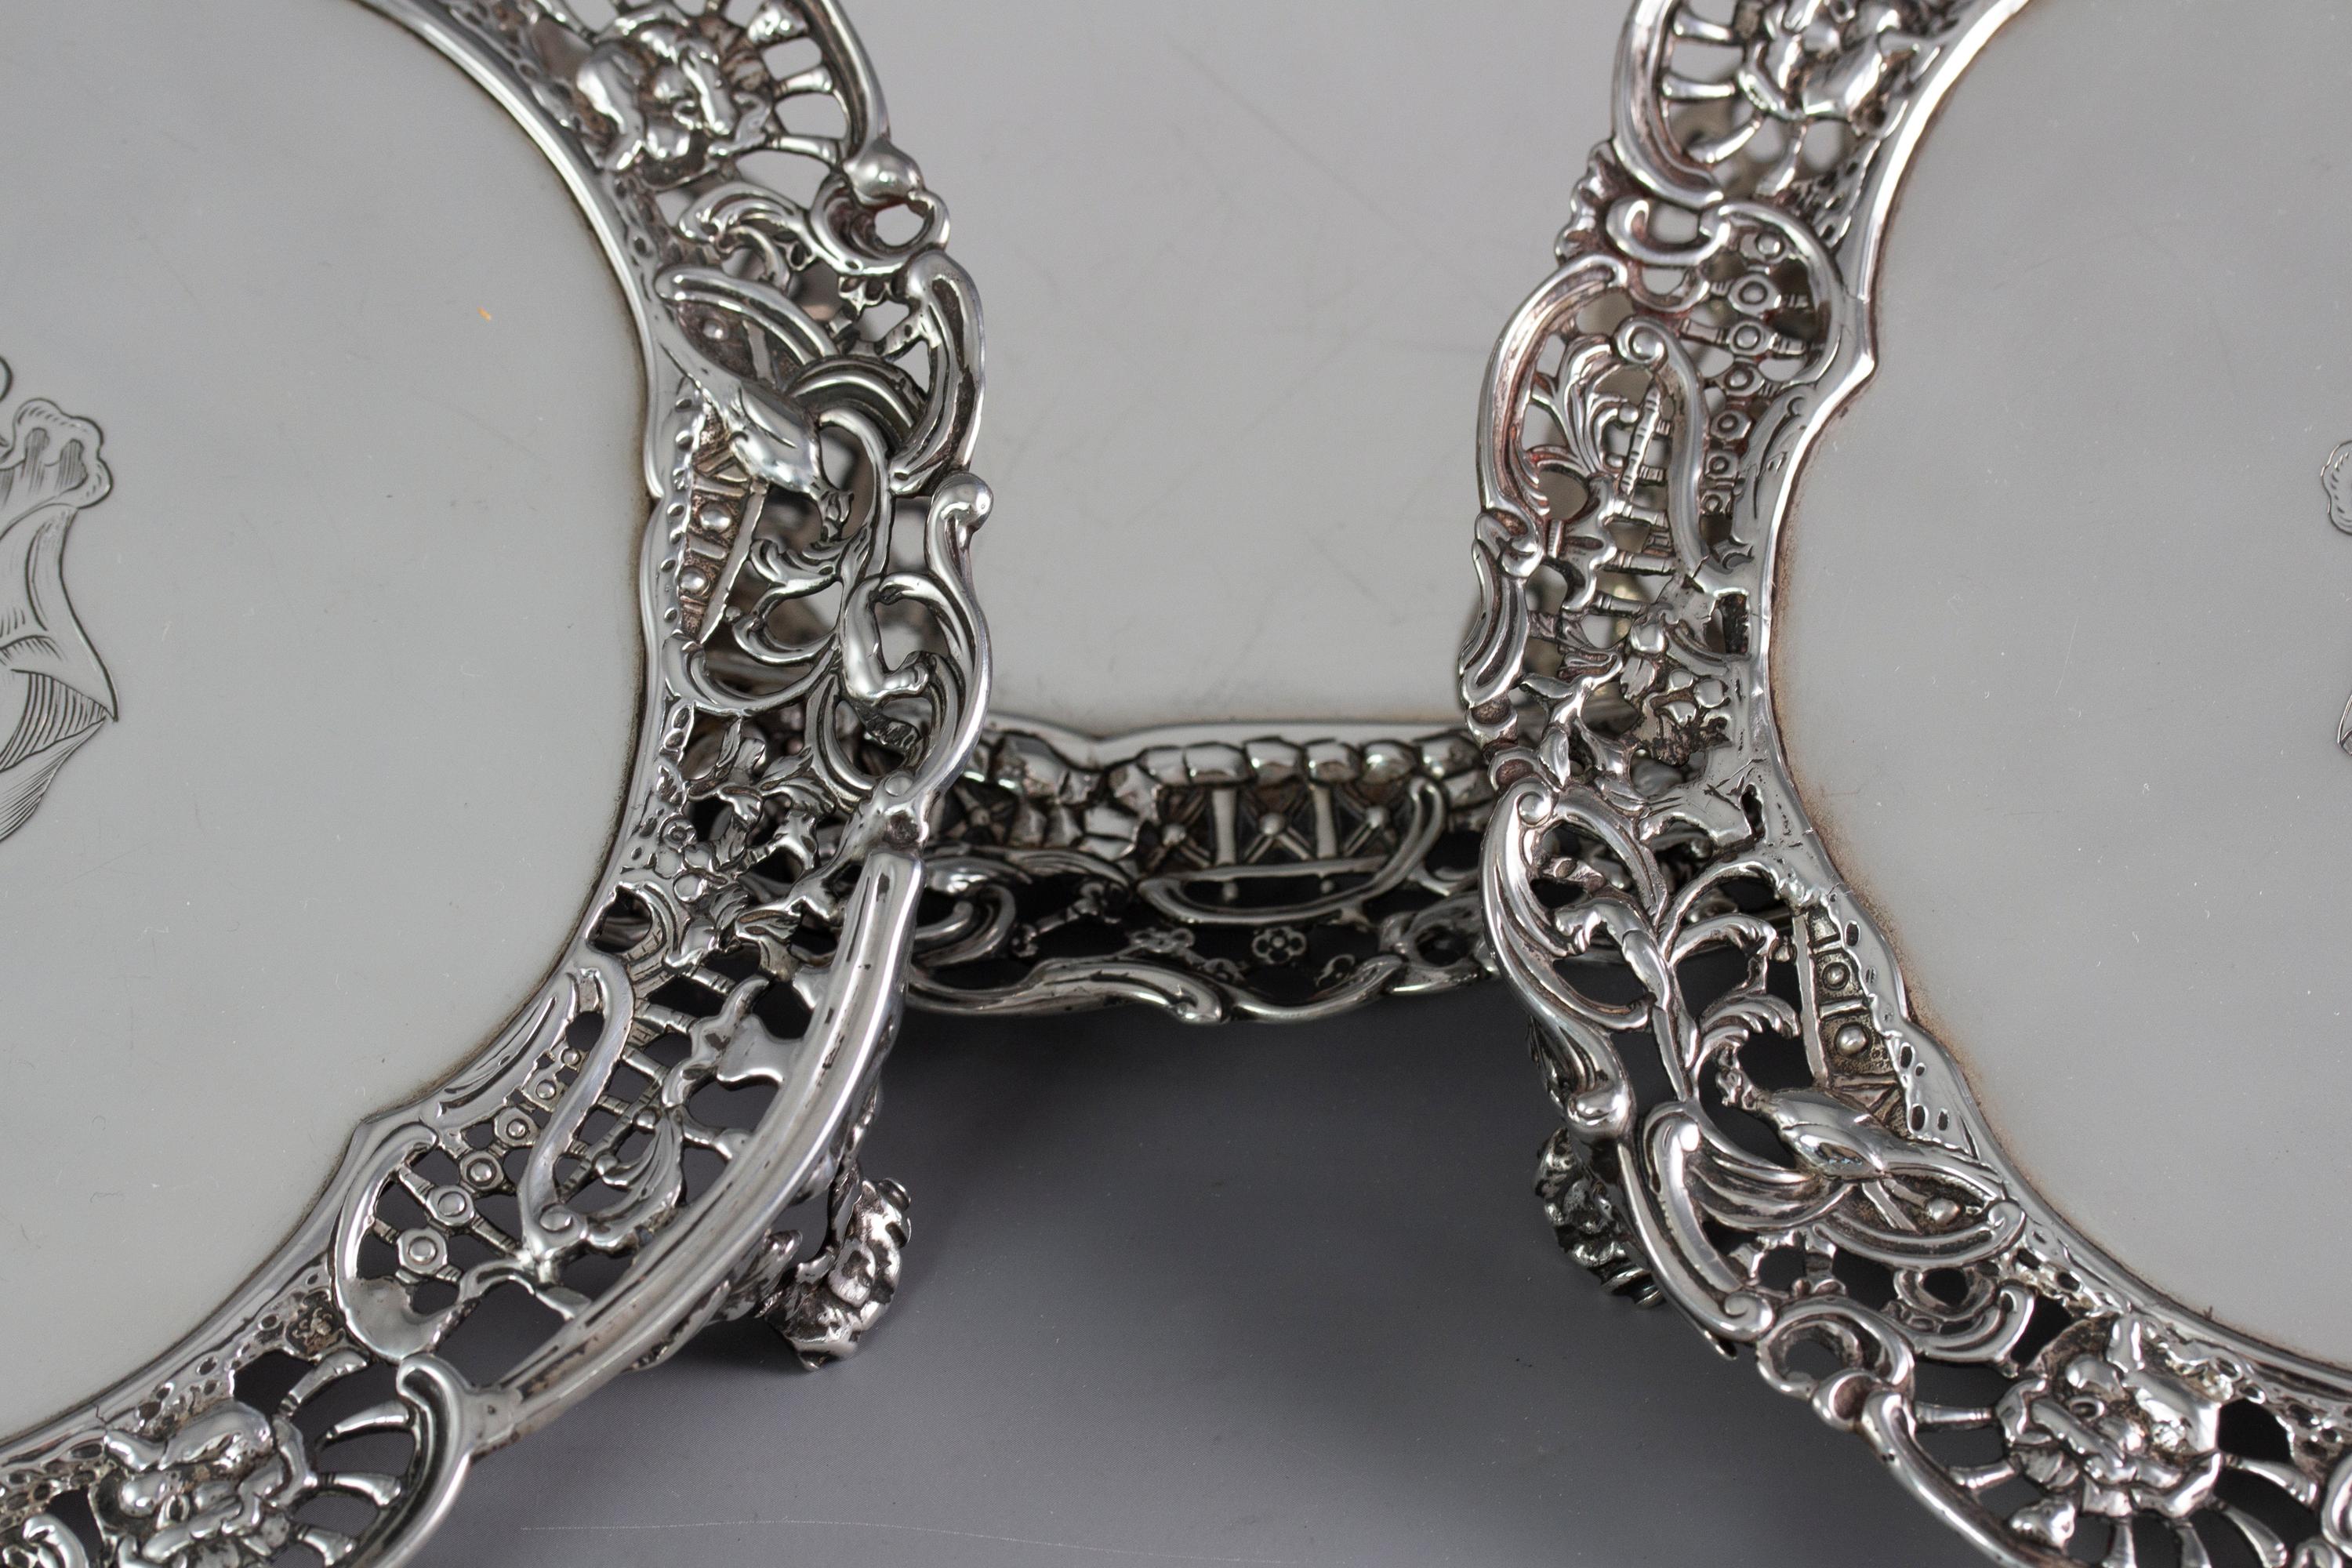 Set of 3 George III Silver Salvers or Trays, London 1762 by Richard Rugg For Sale 5